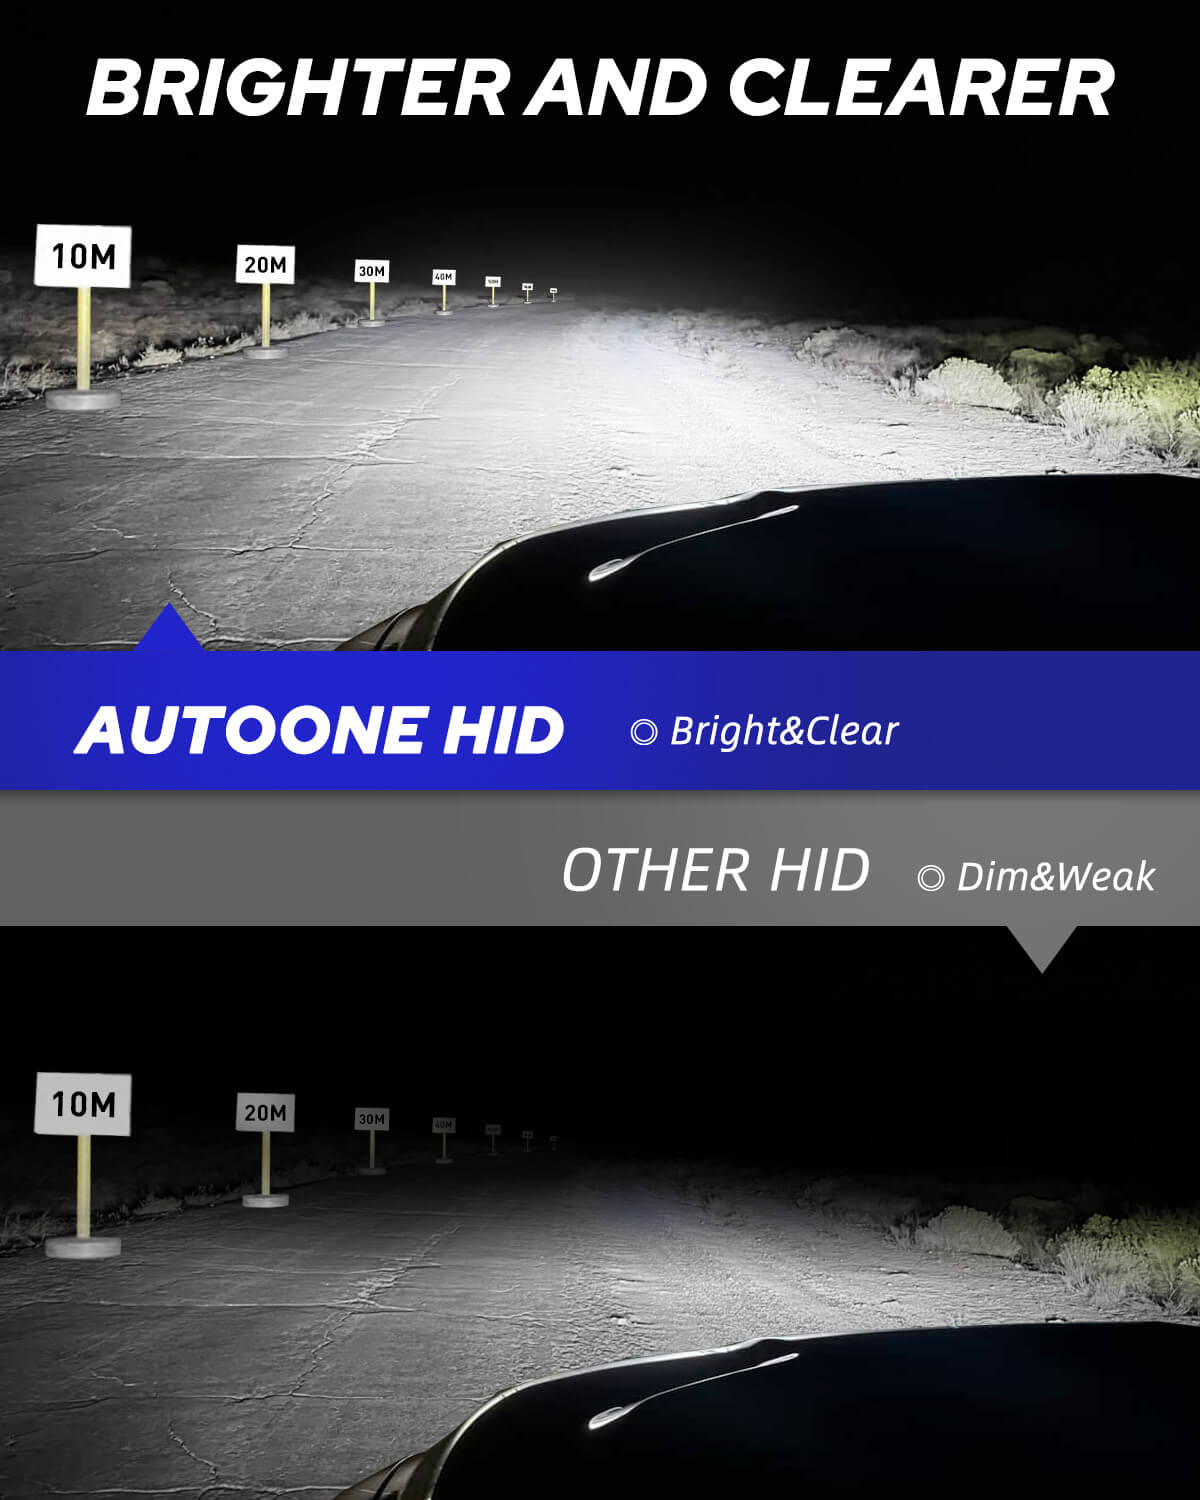 D2S LED Kit | Conversion from Xenon HID to LED Bulbs Plug & Play | Powerful  White Light 360° | 12000LM 6500K